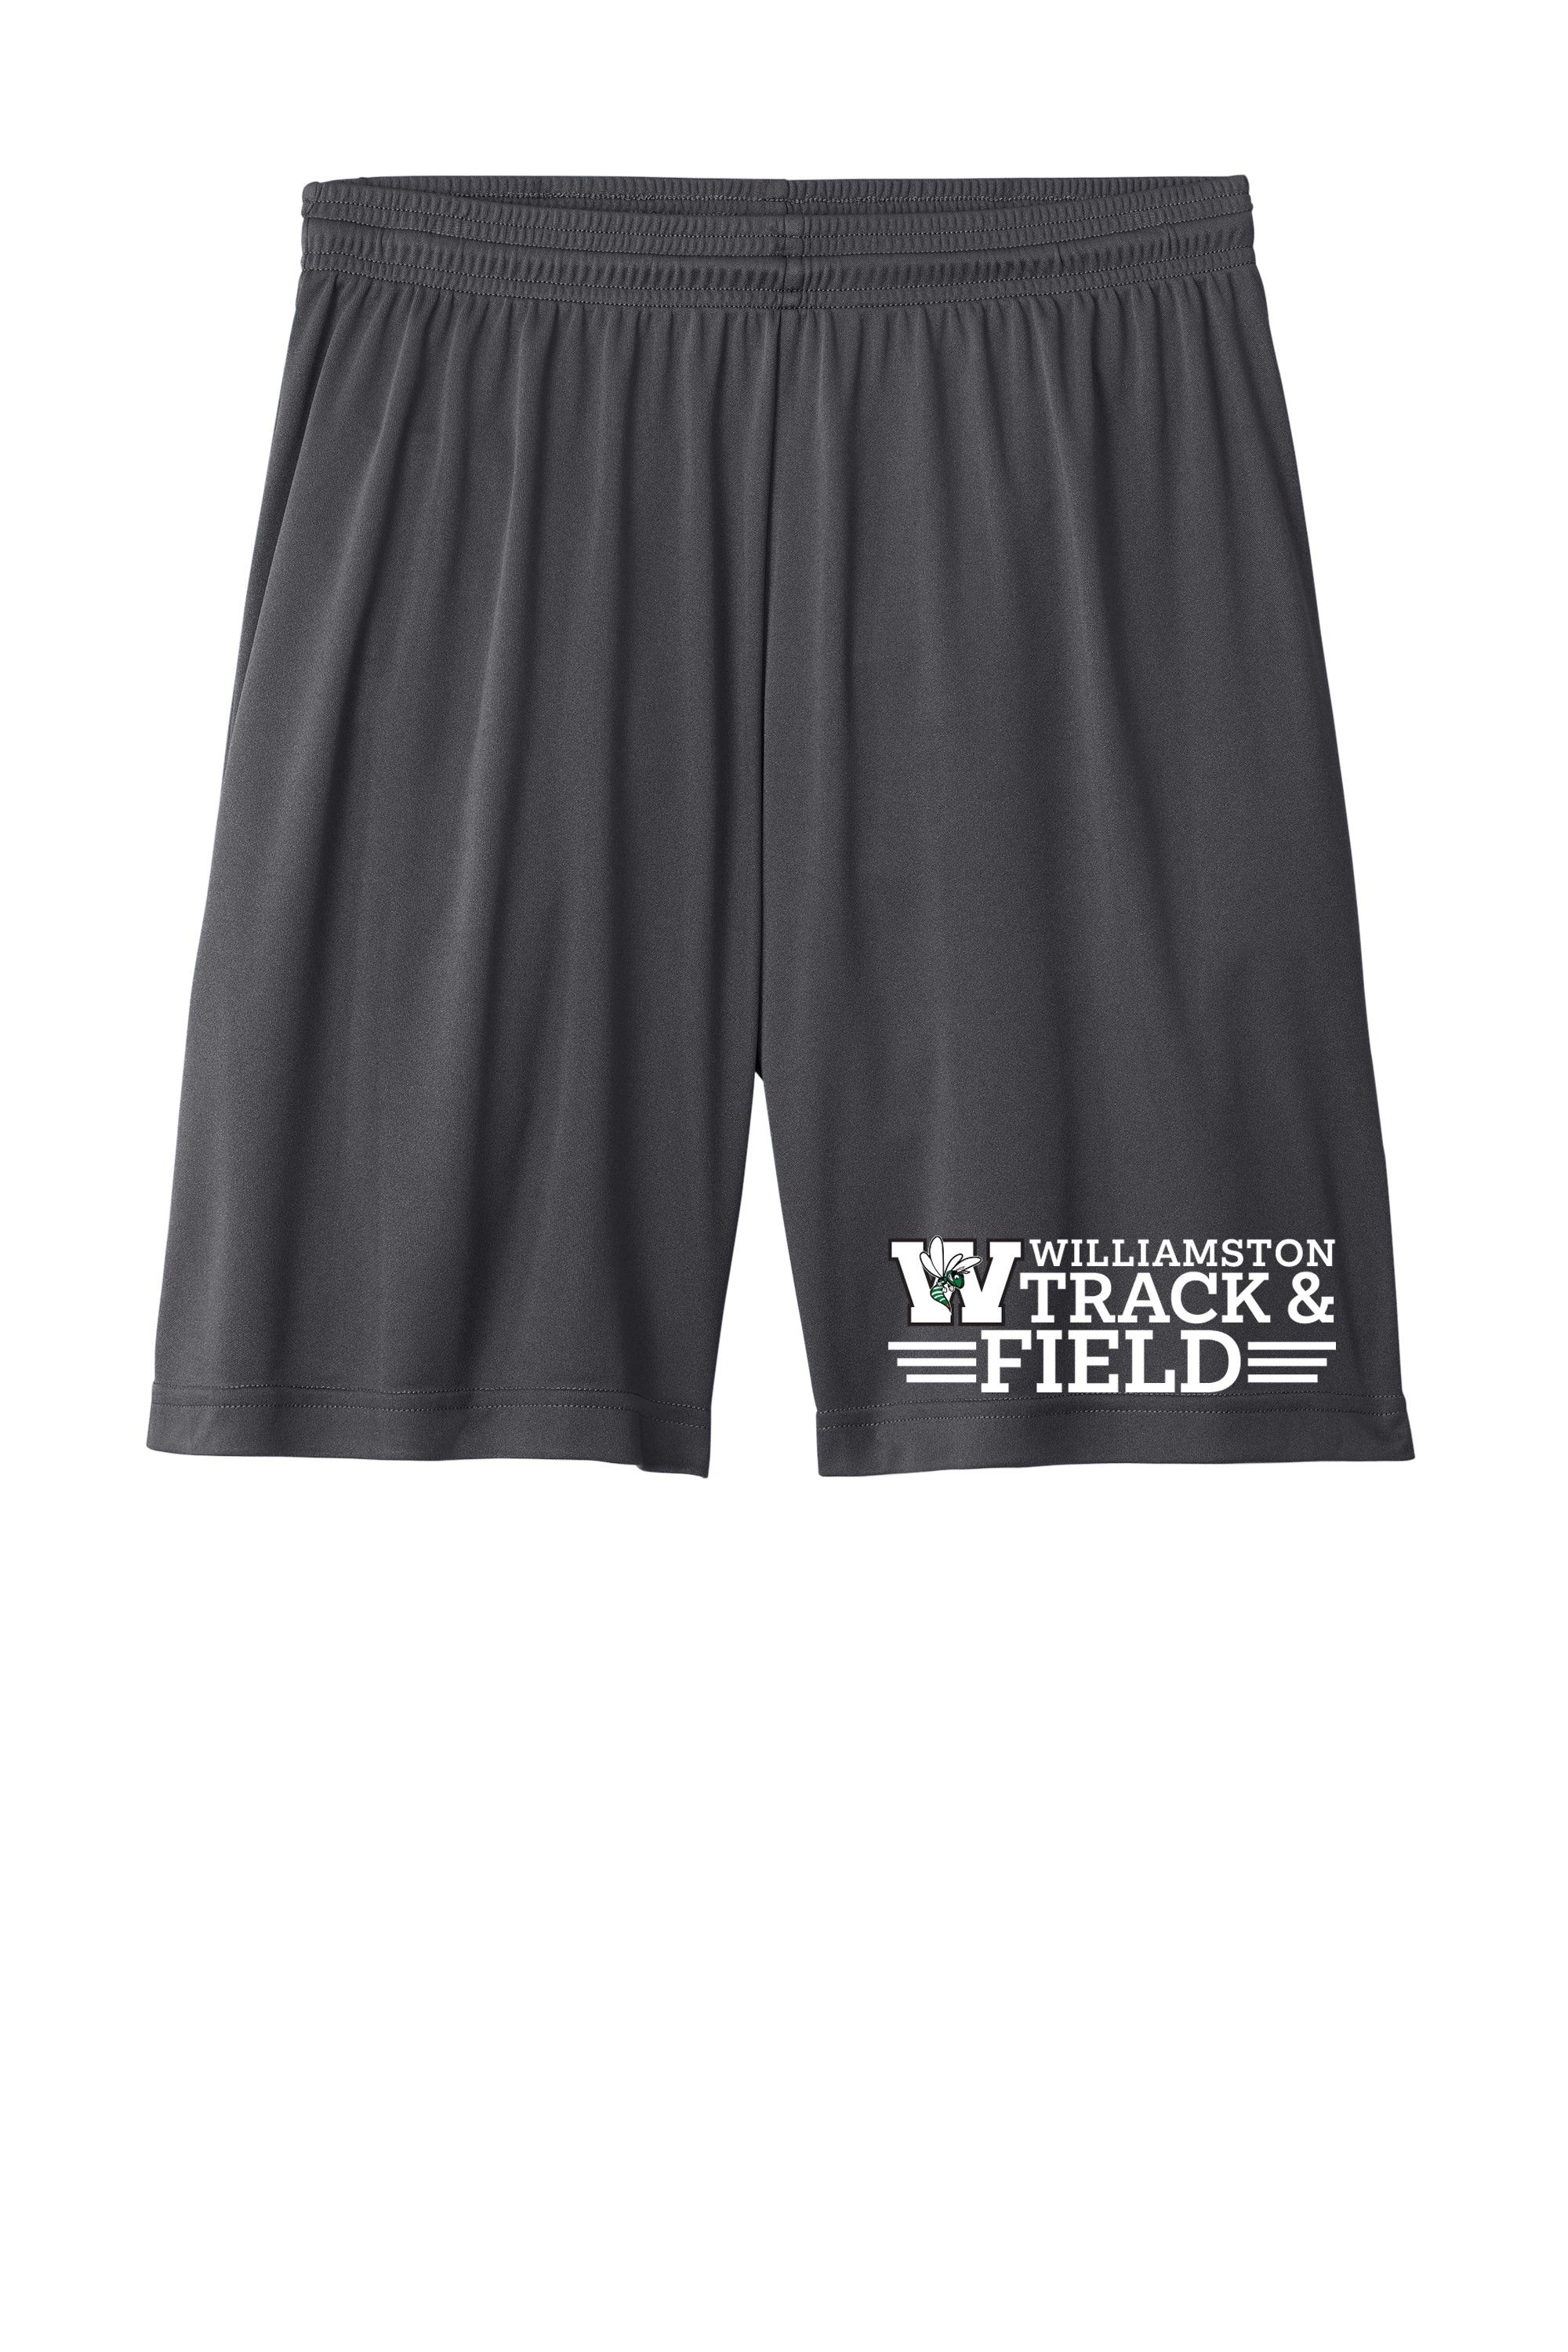 Williamston Track and Field - Shorts